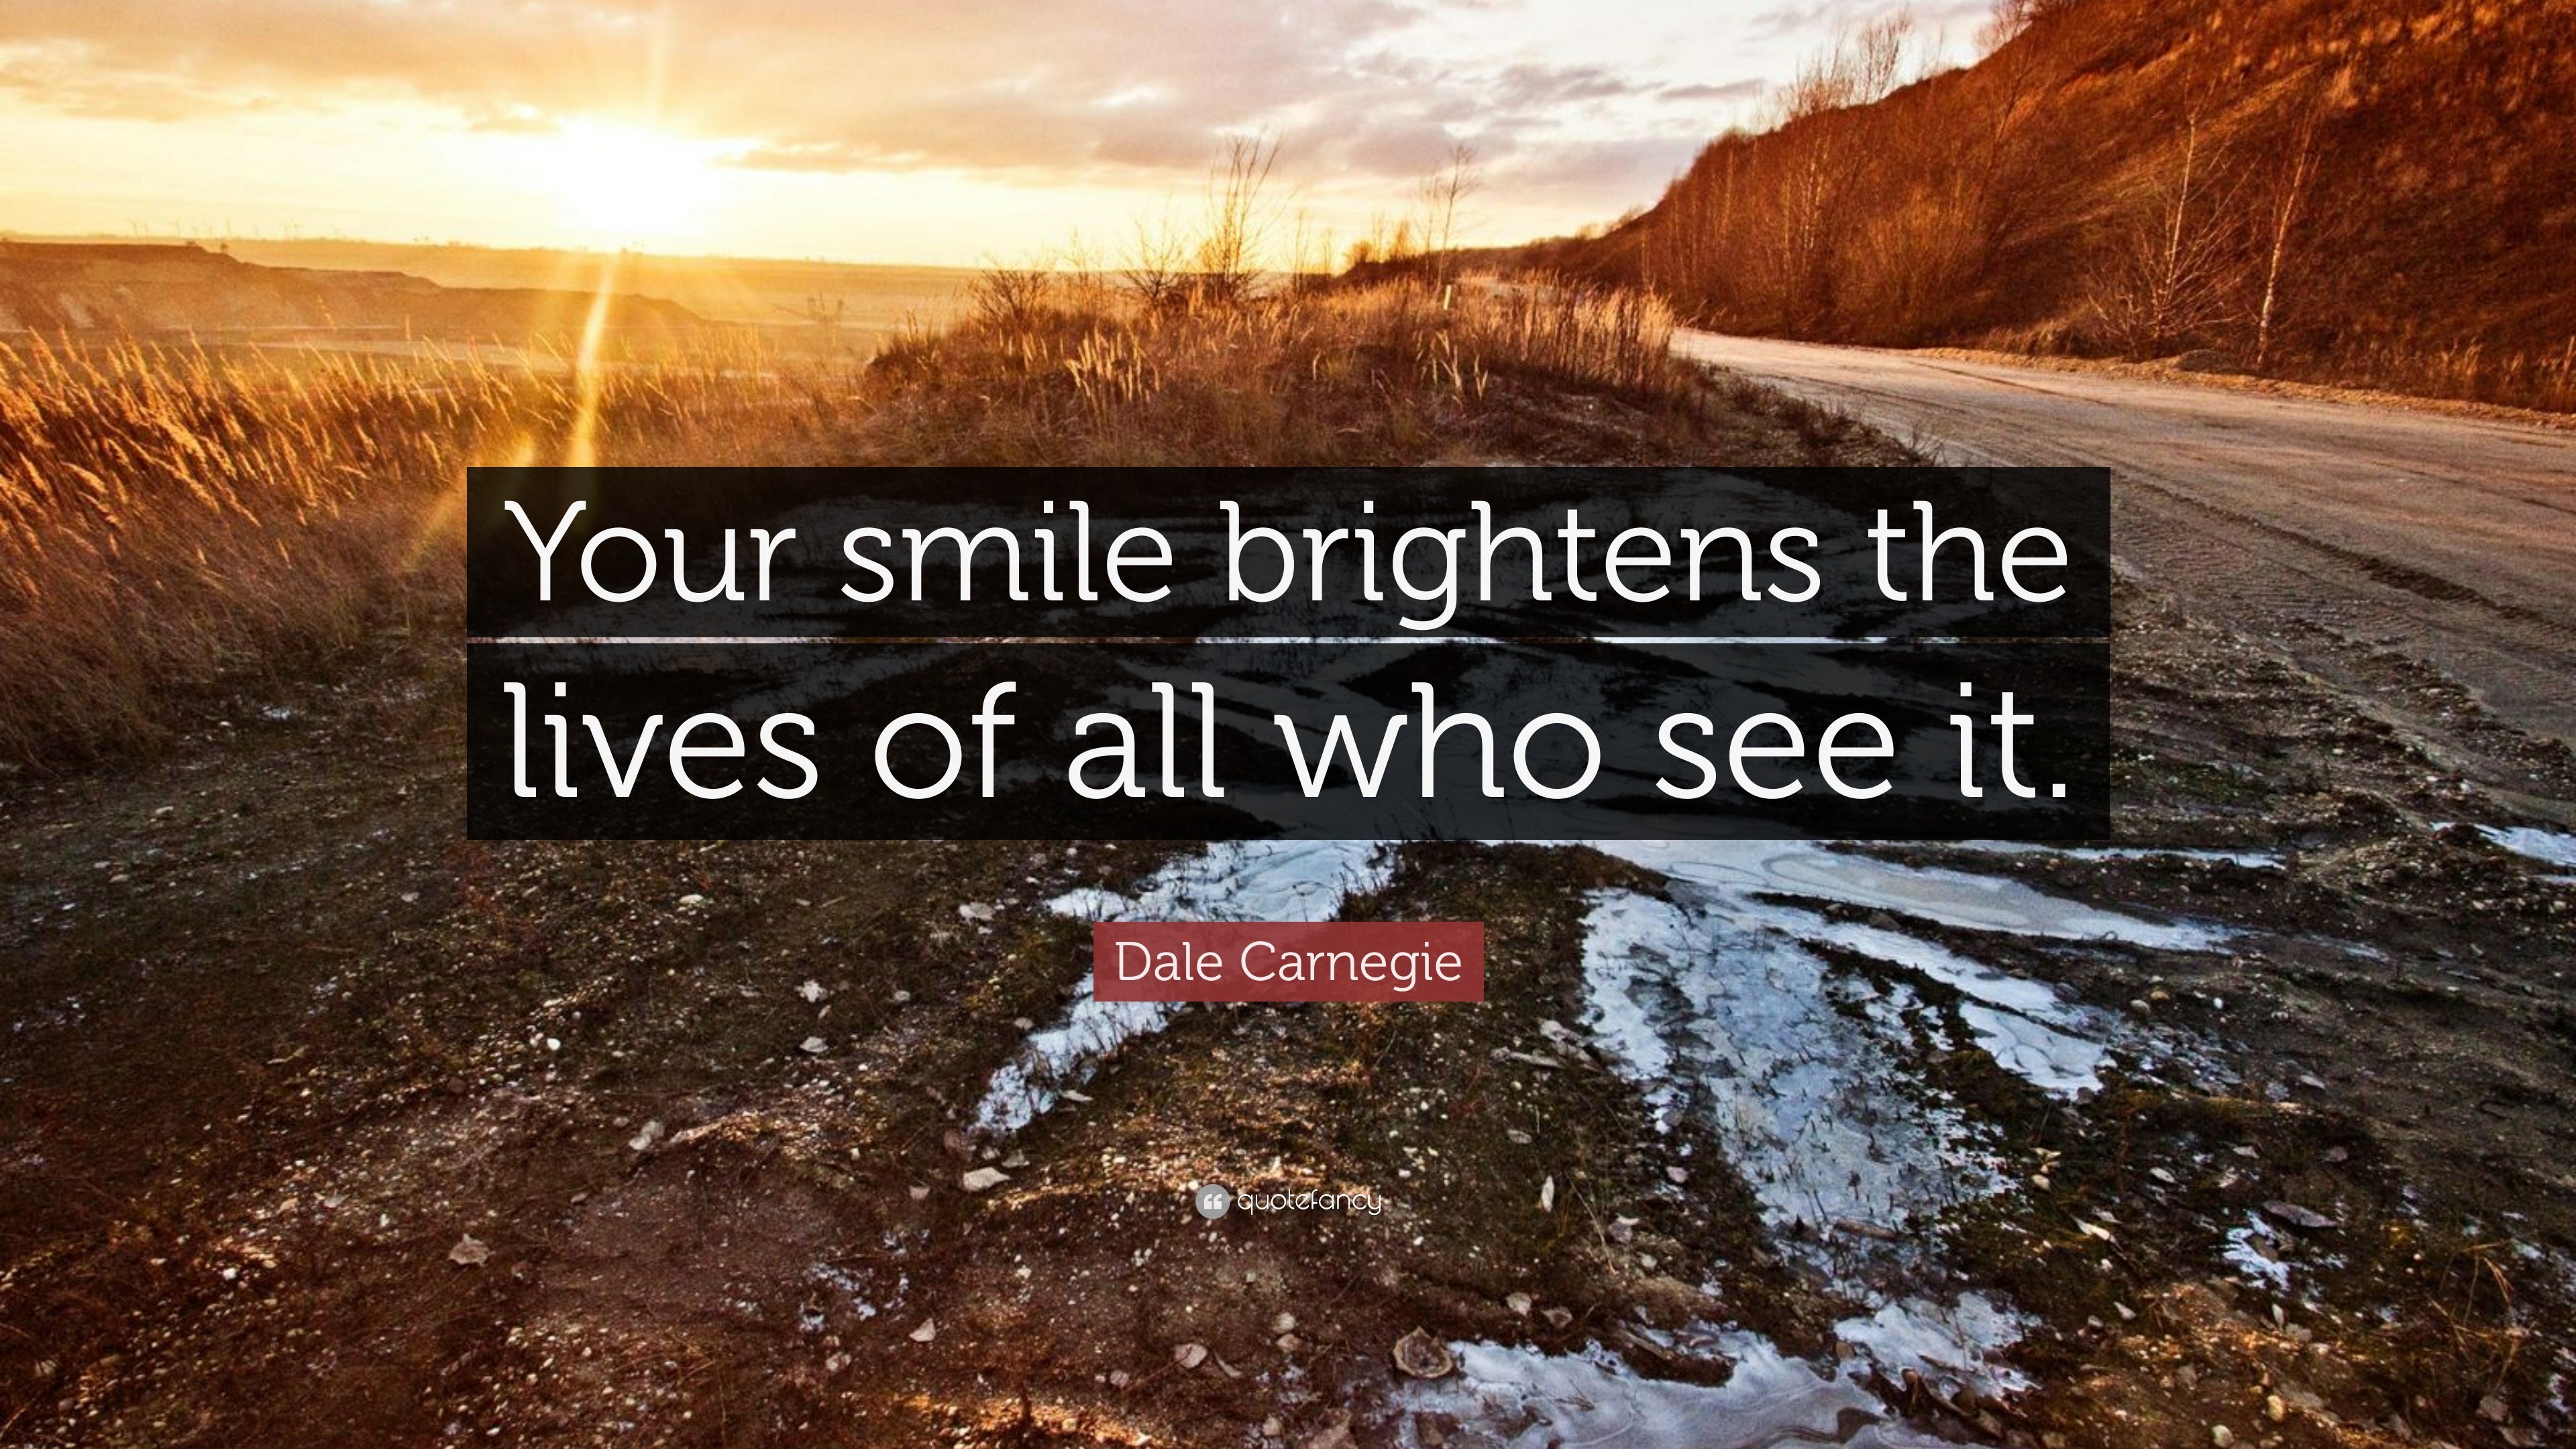 Dale Carnegie Quote “your Smile Brightens The Lives Of All Who See It” 